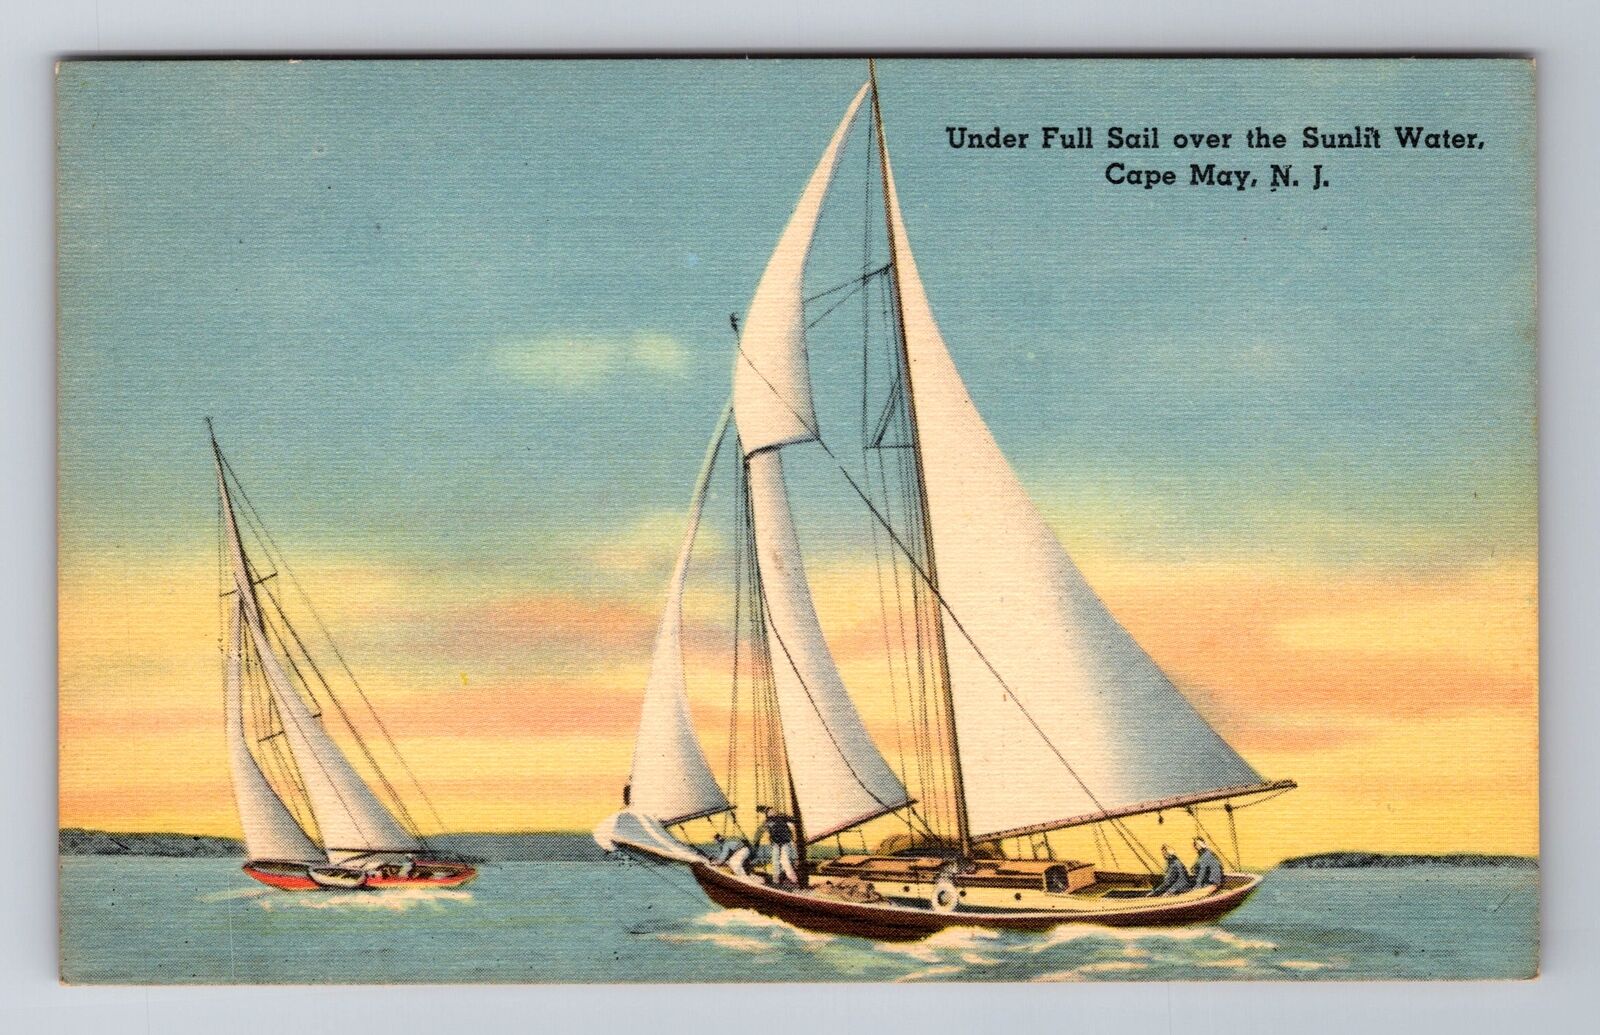 Cape May NJ-New Jersey, Under Full Sail Over Sunlit Water, Vintage Postcard